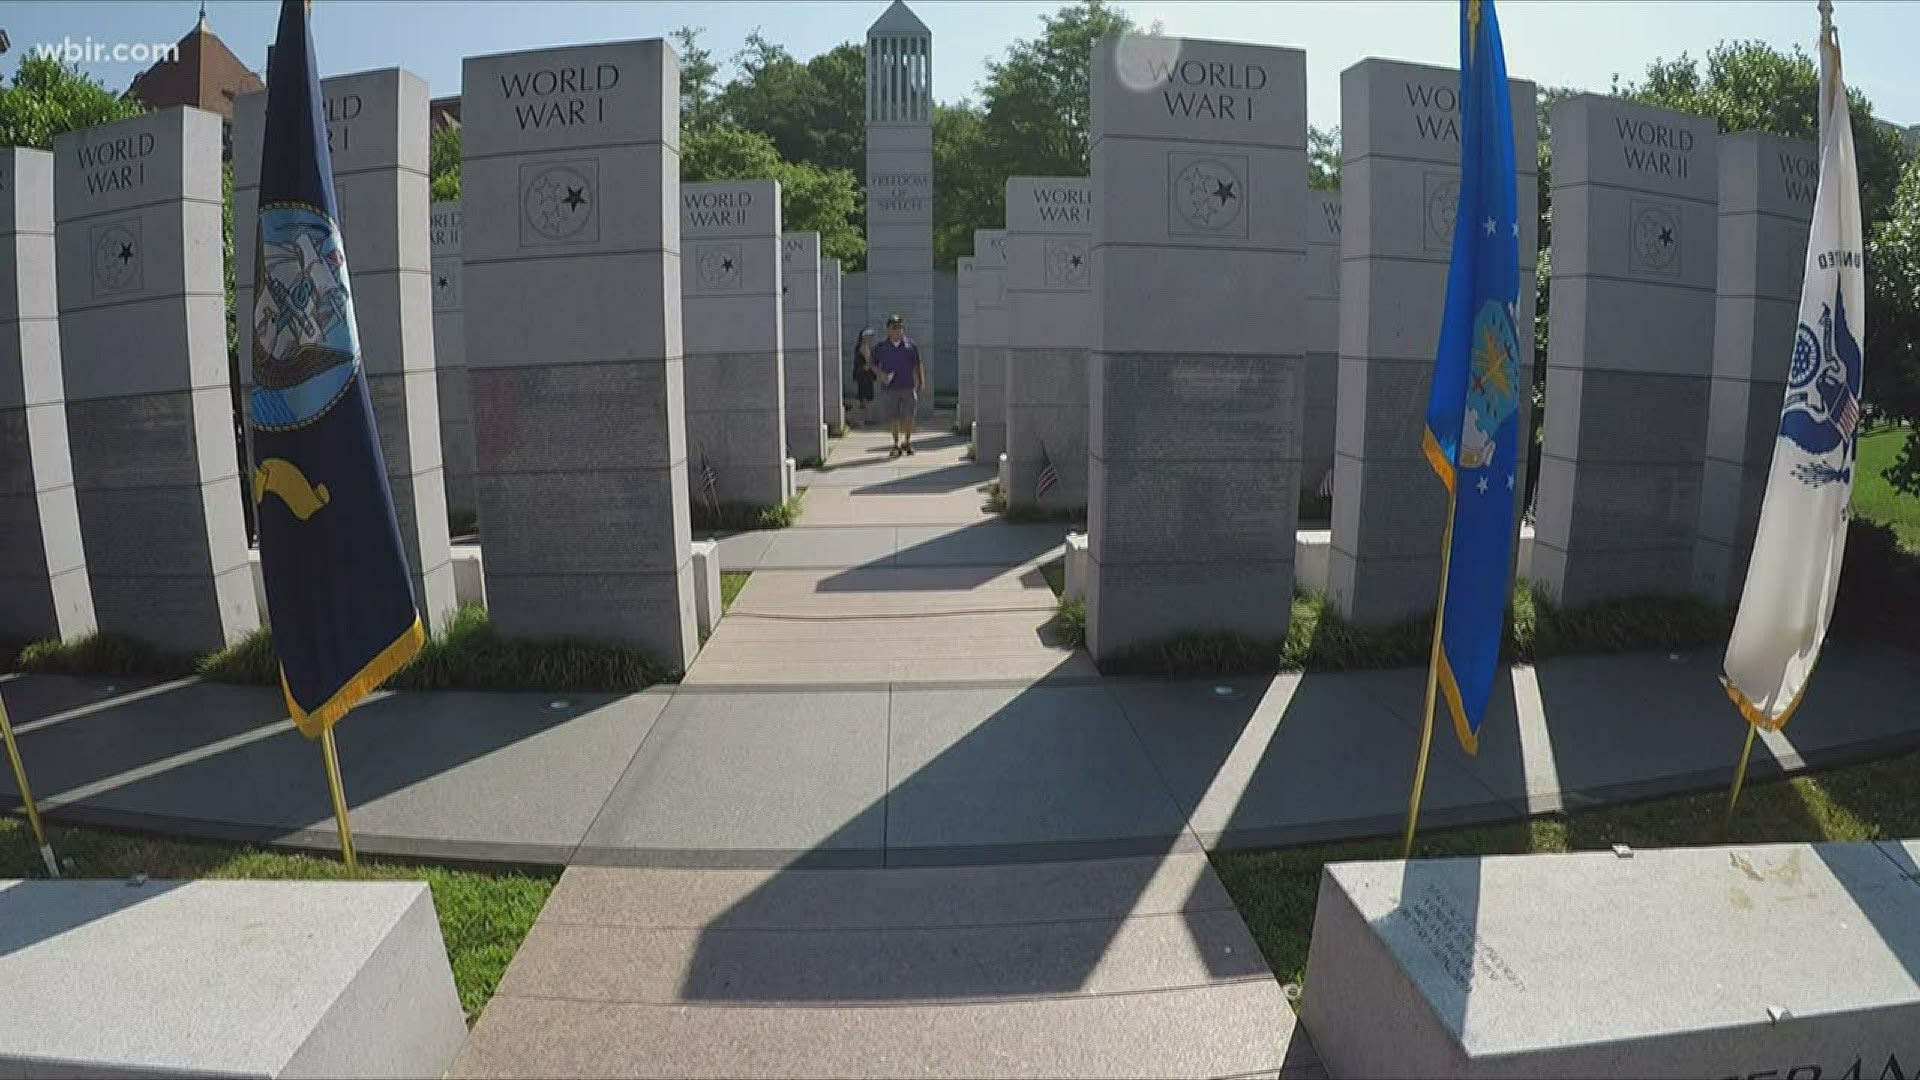 The "Reading of the Names" will happen this morning at the East Tennessee Veterans Memorial in Downtown Knoxville.